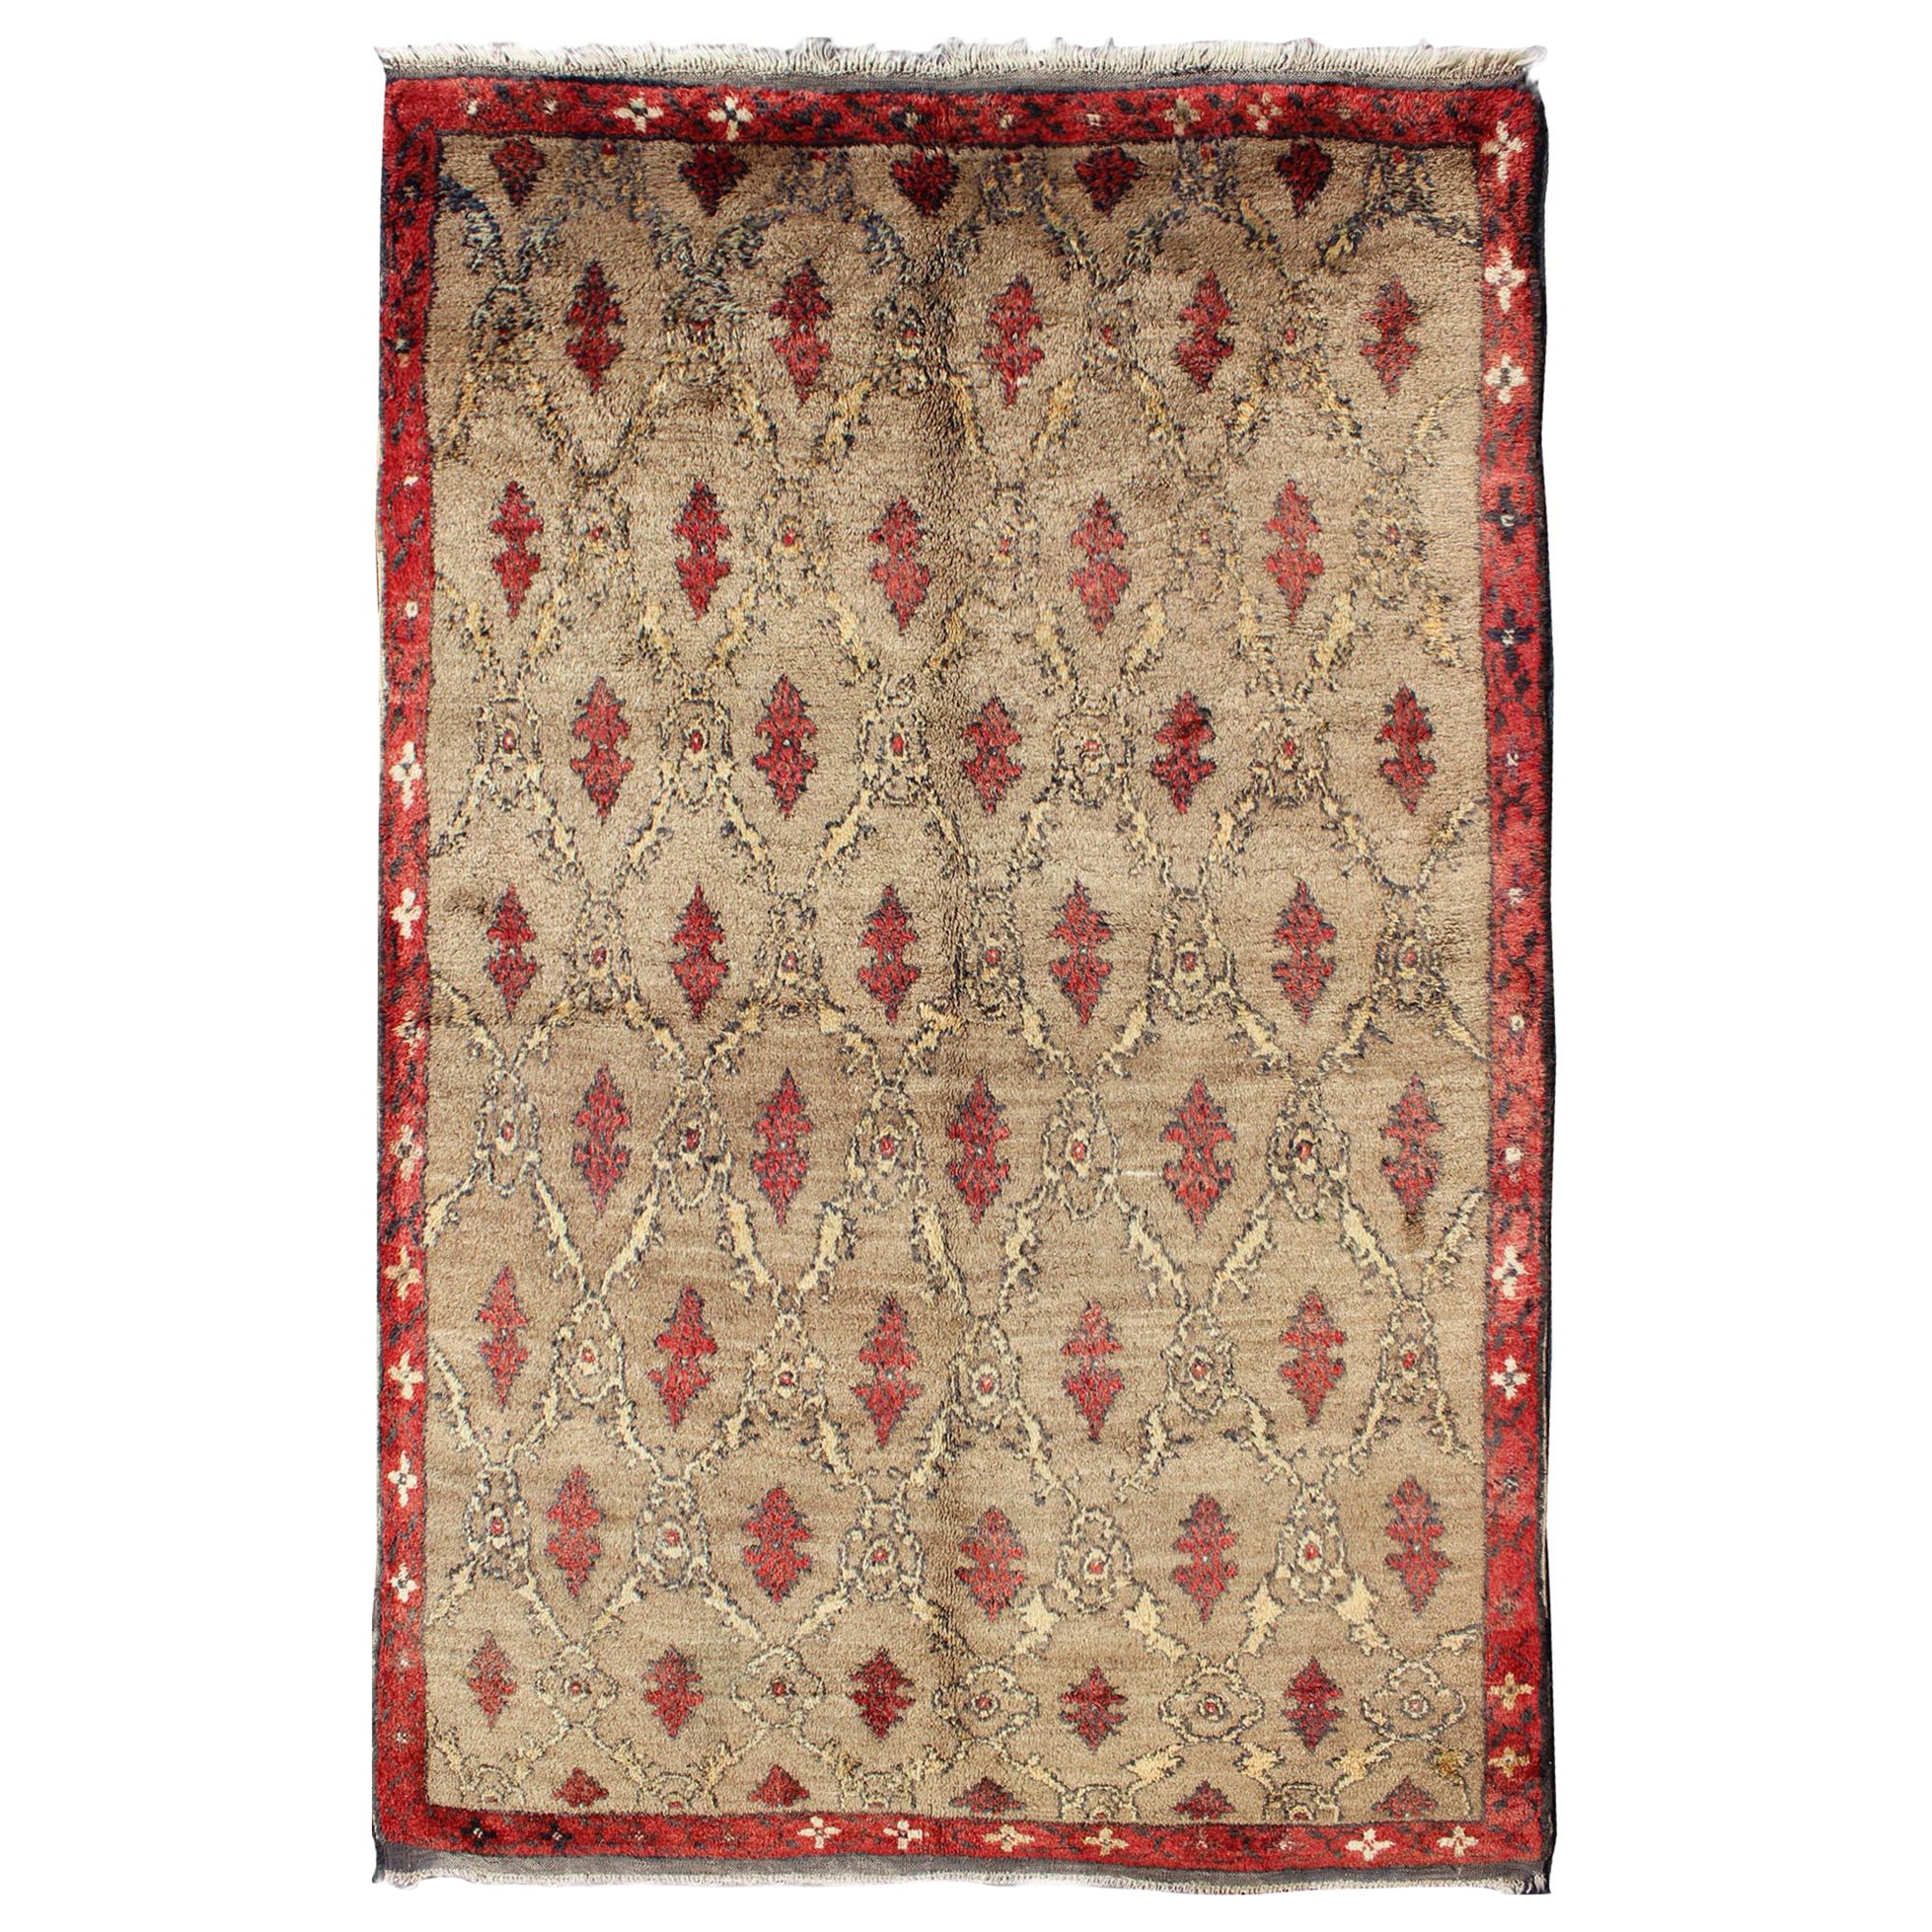 Mid Century Tulu Carpet in Sand Color Background